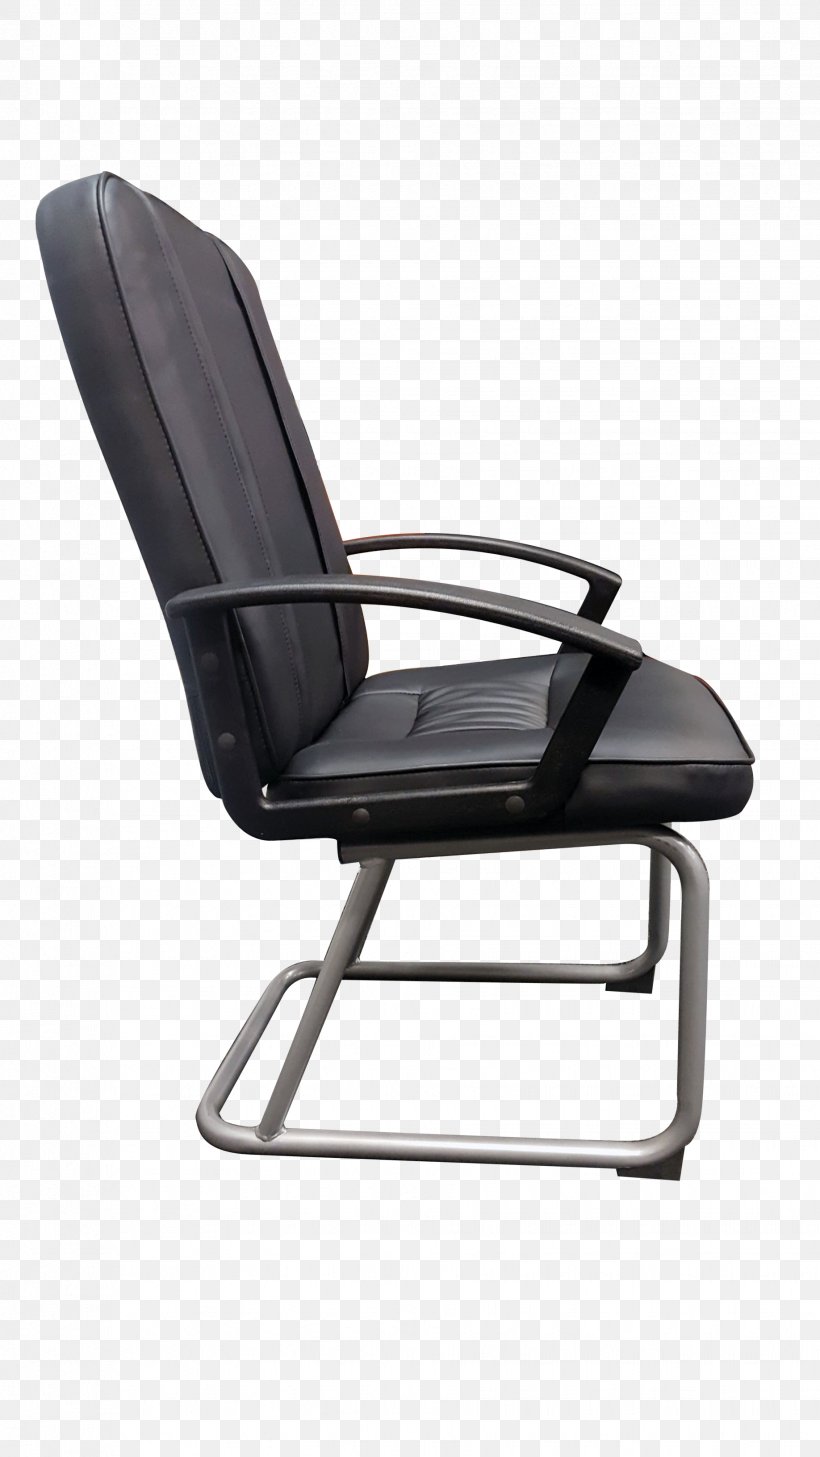 Chair Plastic Comfort Armrest, PNG, 1836x3264px, Chair, Armrest, Comfort, Furniture, Garden Furniture Download Free